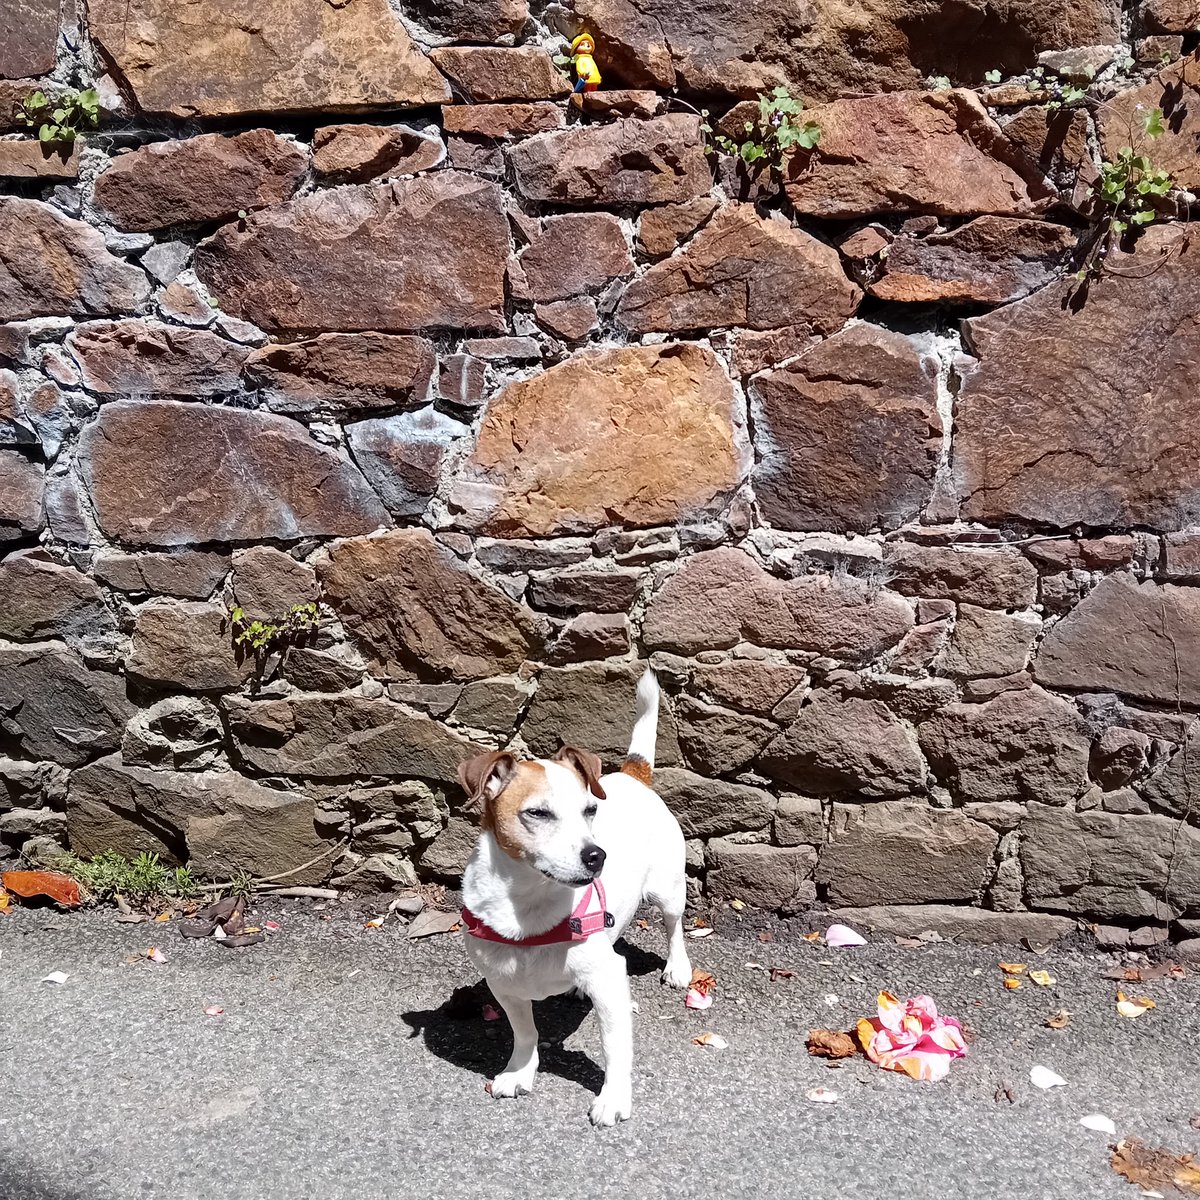 Took Lilly to the beach today & found little things in the walls on our walk!! Cool toy wall in hidden Gorey.. @TheOnlyGuru @suedelacour @MiloShropshire @StrontiumCat @AndreaLeSaint2 @AndreaLeSaint2 @redteamJSY #terriers #sunshine #Mondayvibes